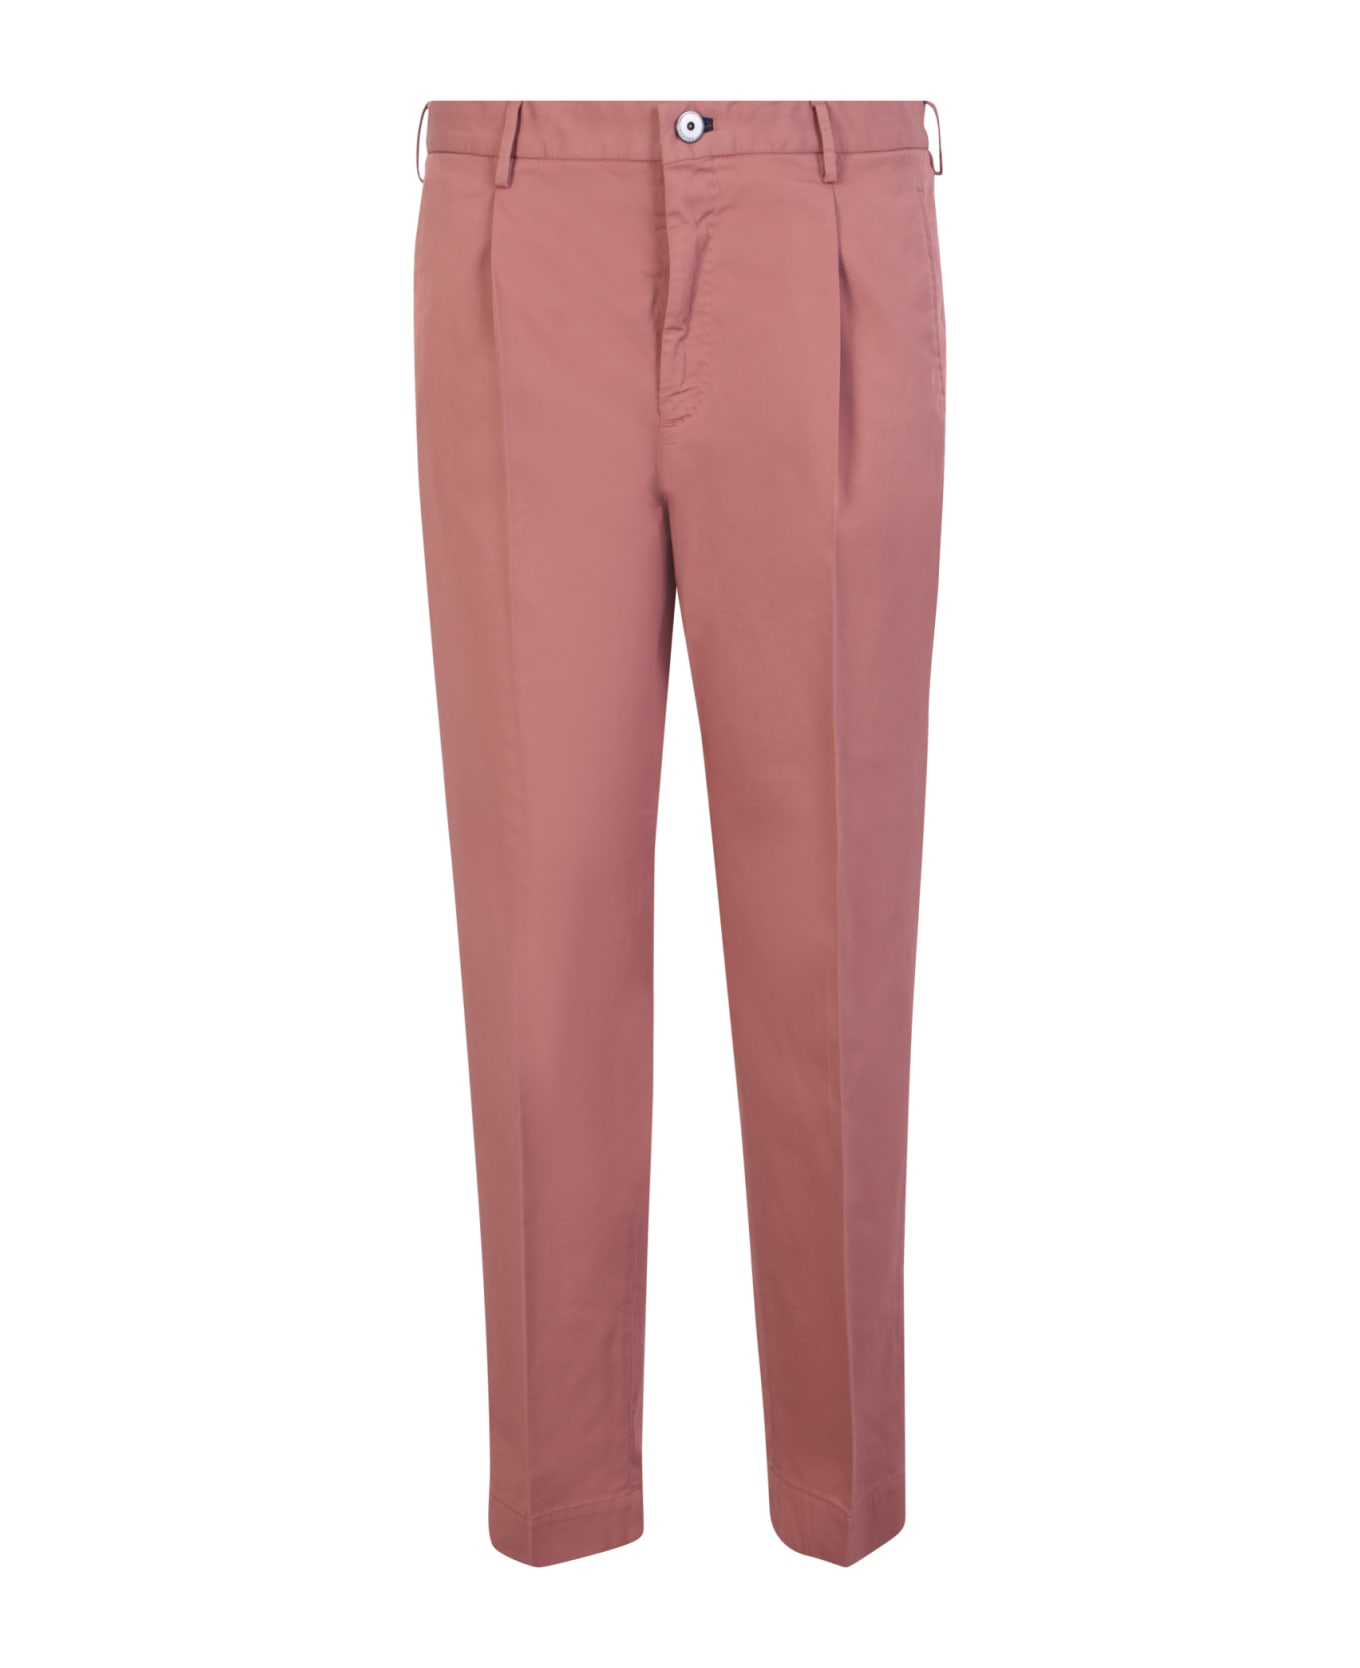 Incotex Antique Pink Trousers - Pink ボトムス